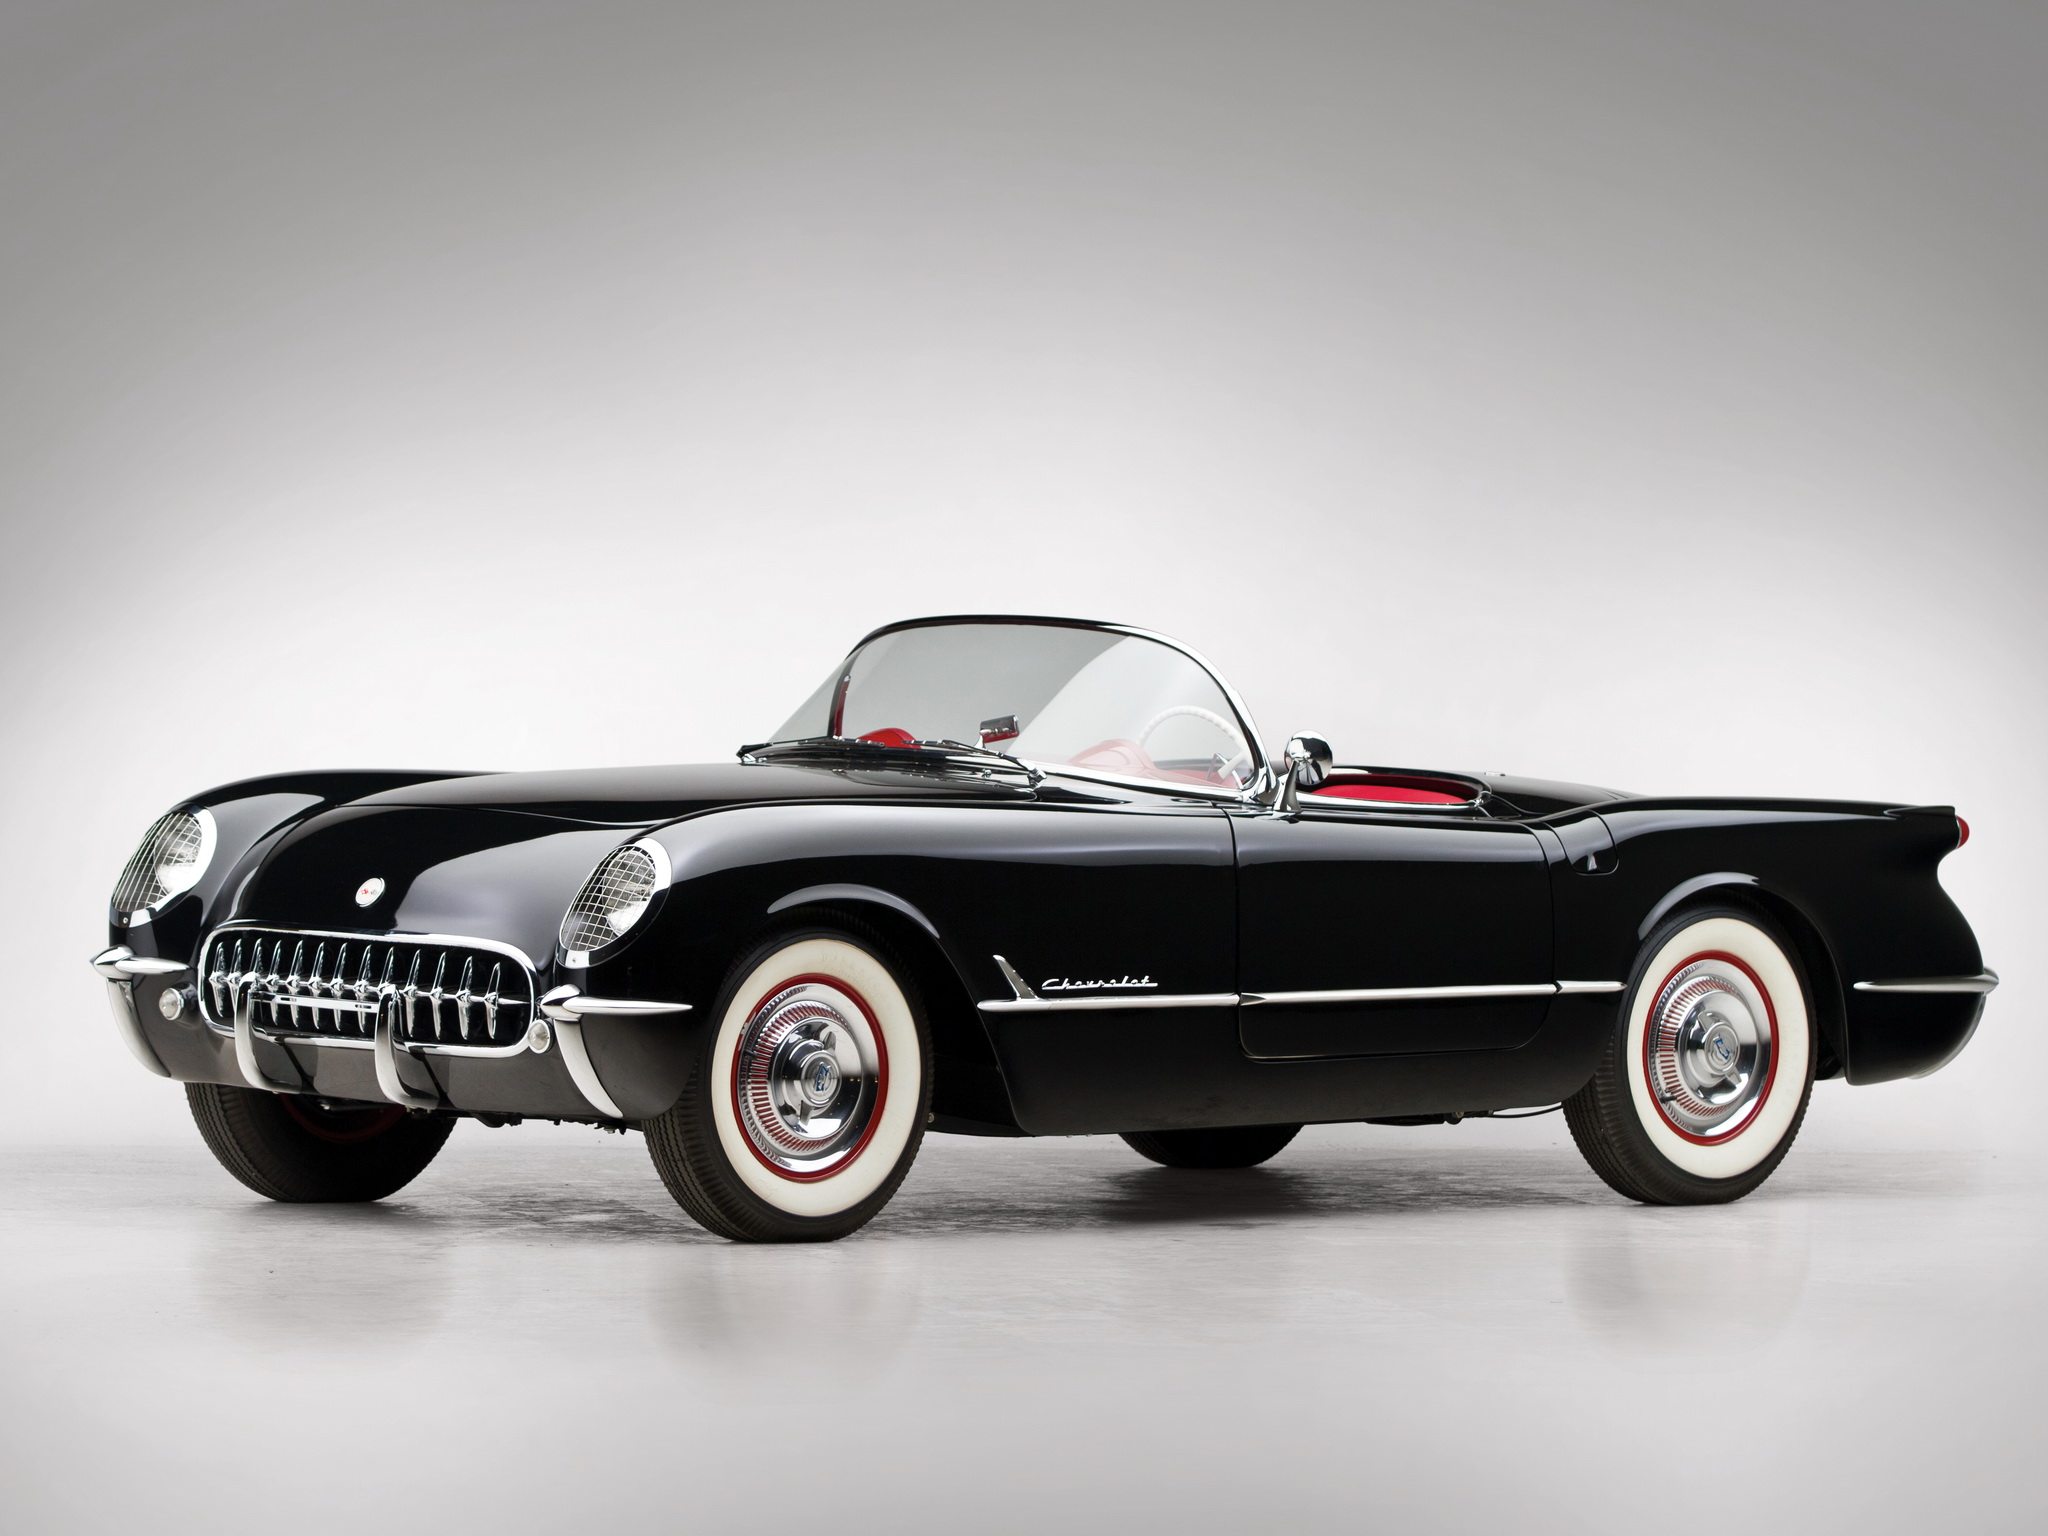 The 1954 Corvette in Black with Sportsman Red Interior.